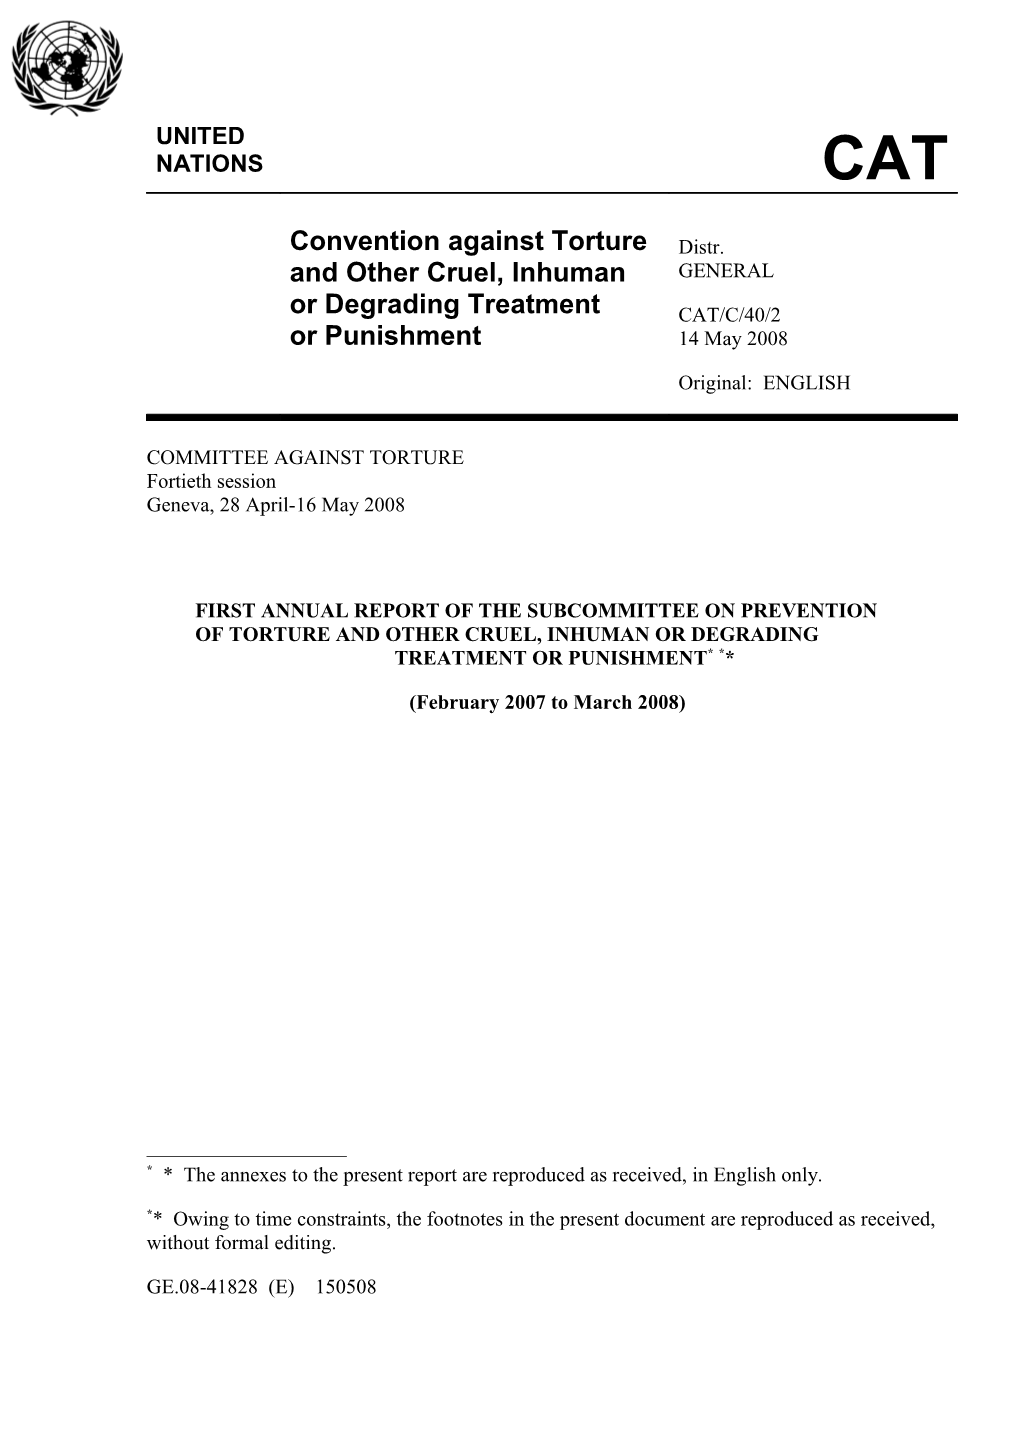 First Annual Report Ofthe SUBCOMMITTEE on PREVENTIONOFTORTURE and OTHER CRUEL, INHUMAN